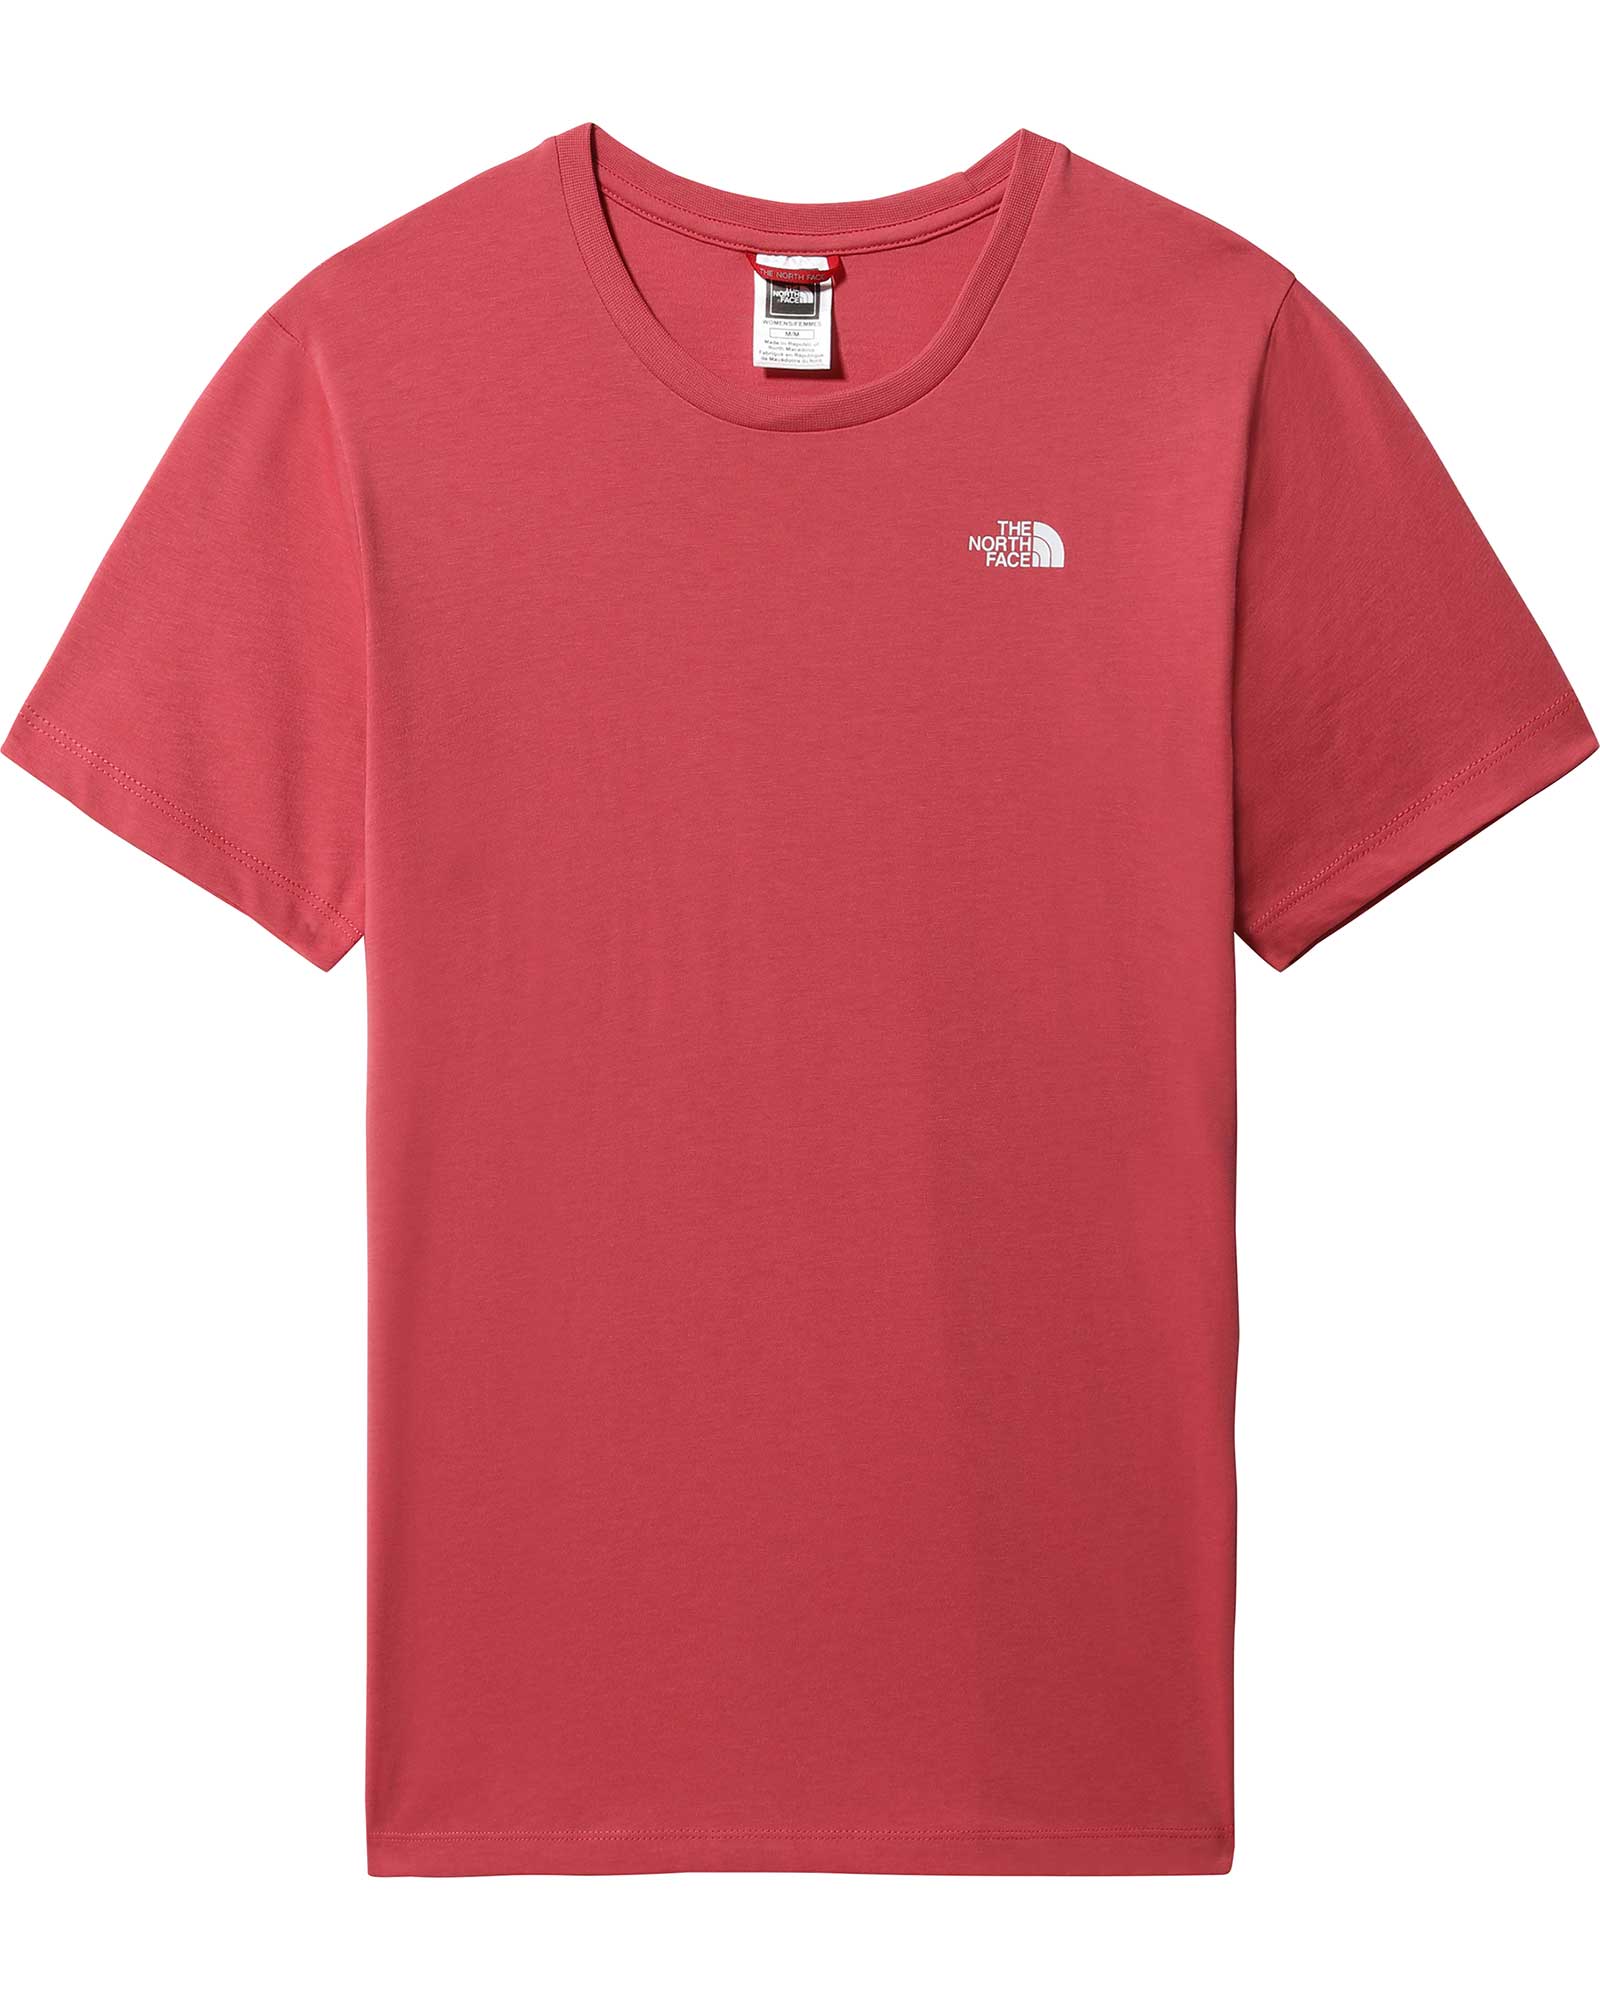 Product image of The North Face Simple Dome Women's T-Shirt